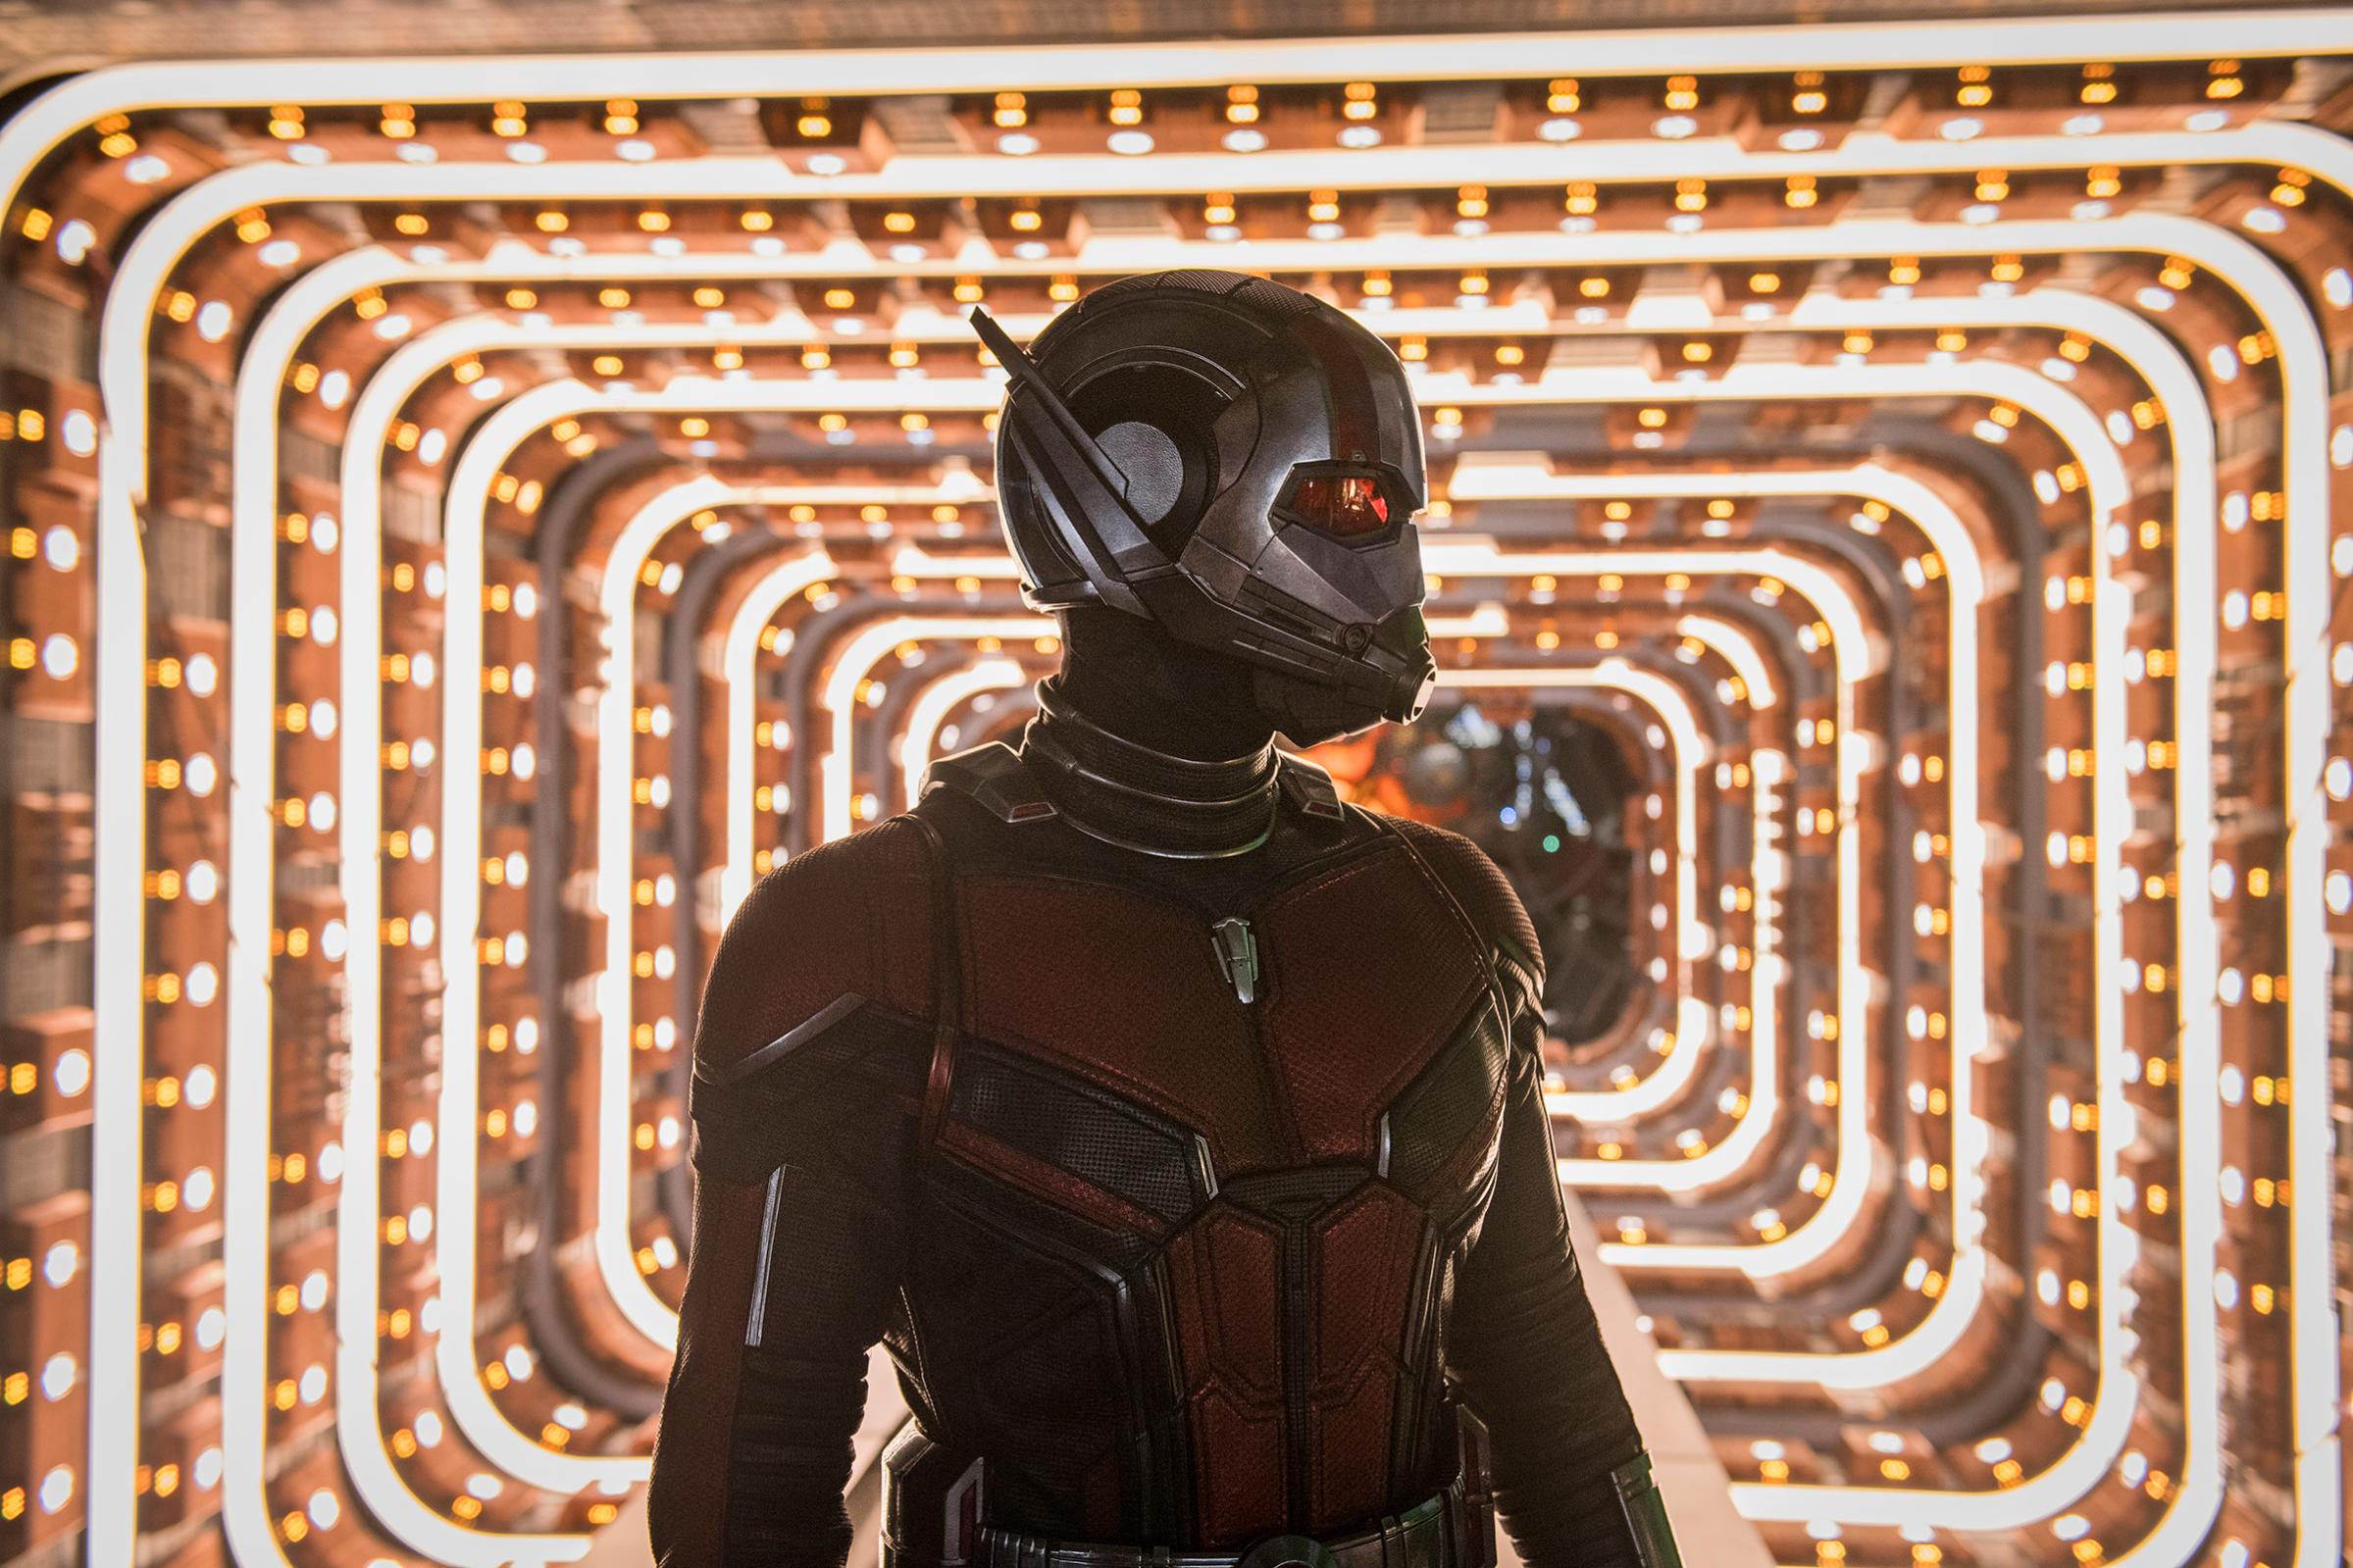 Paul Rudd in “Ant-Man and the Wasp”.